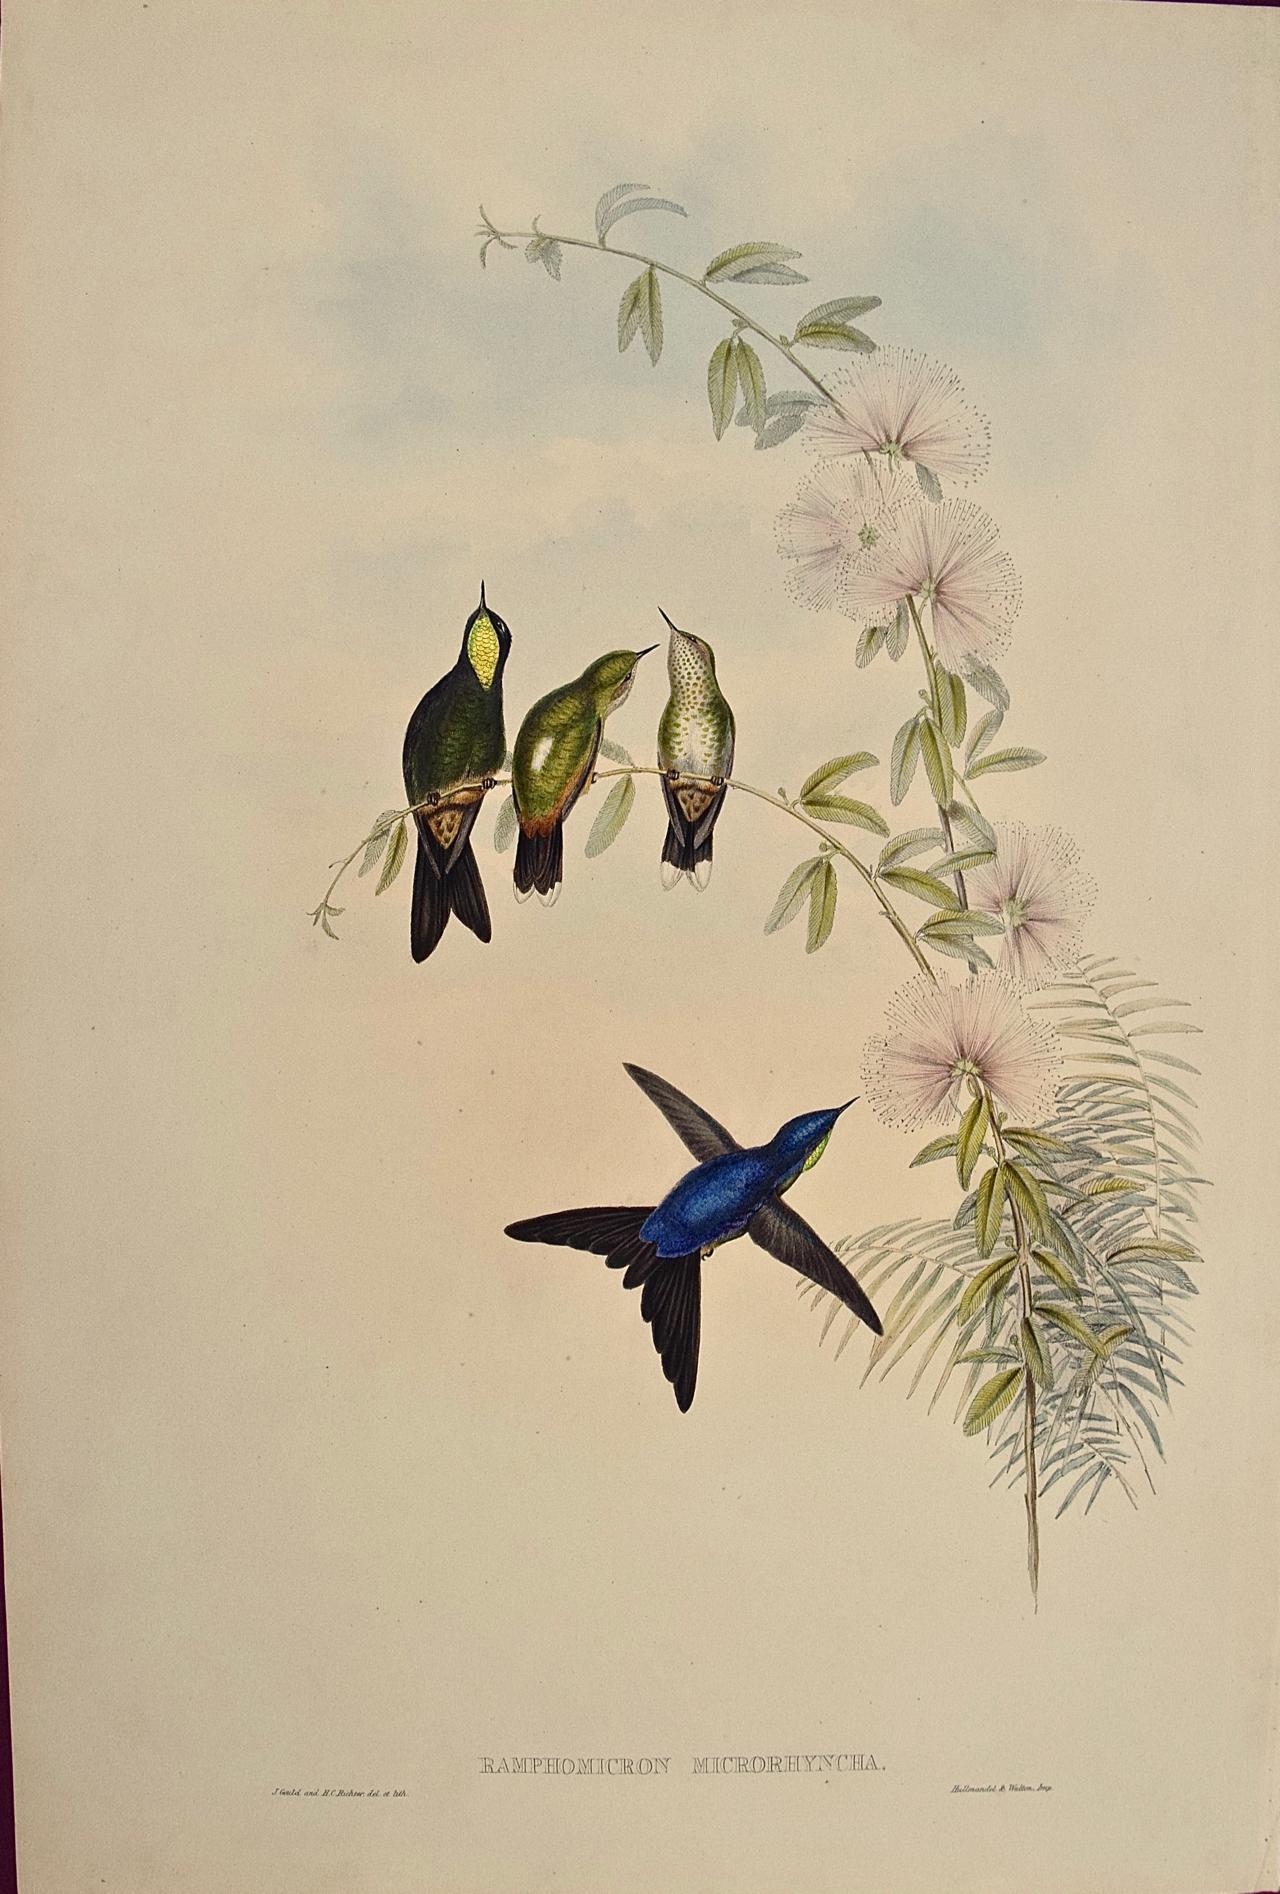 John Gould and Henry Constantine Richter Animal Print - 19th C. Gould Hand-colored Ramphomicron Microrhyncha (Thorn-billed Hummingbirds)